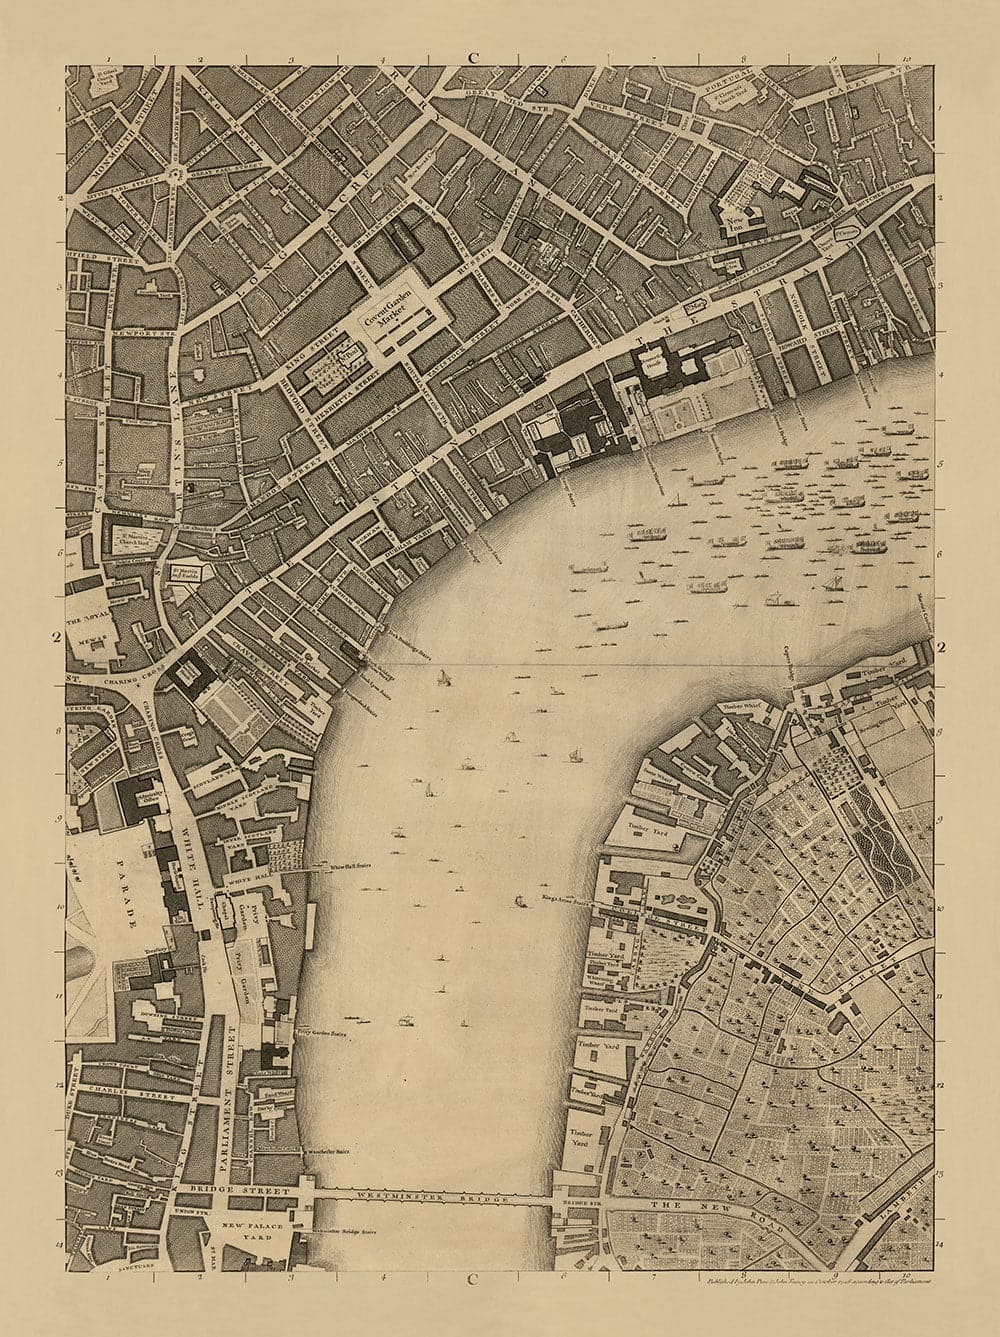 Old Map of London, 1746 by John Rocque - C2 - Somerset House Covent Garden Seven Dials Waterloo, Charring Cross, Westminster Lambeth